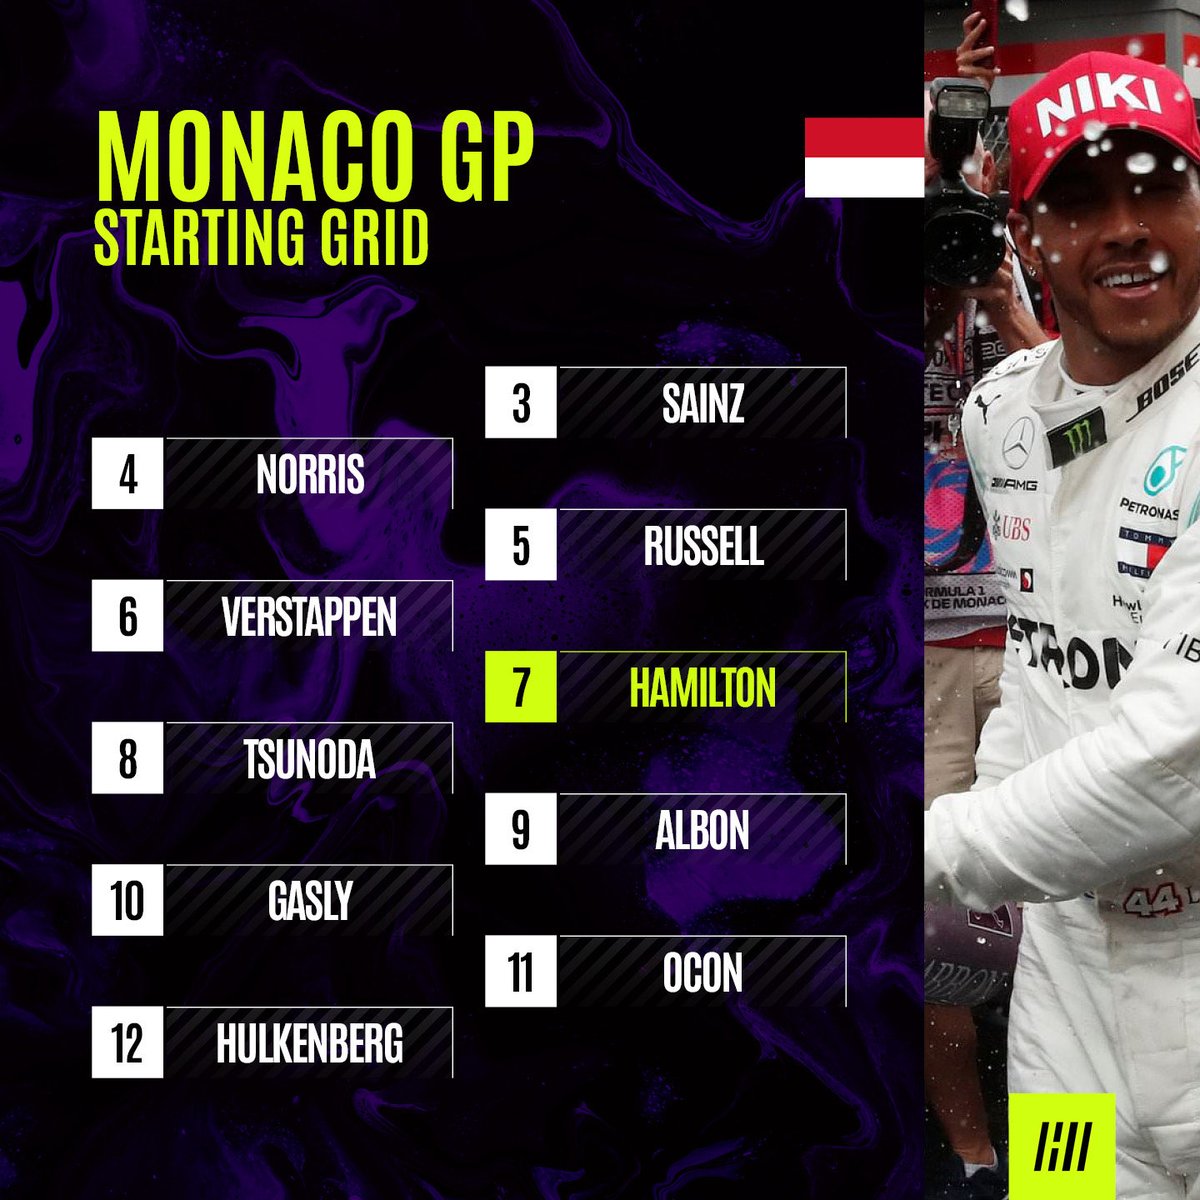 Interesting lineup ahead of us… George and MV have the chance to do the funniest thing ever 🙃😏 Don’t mind HULK, he’s starting from the pit lane 😄😅 #MonacoGP 🇲🇨